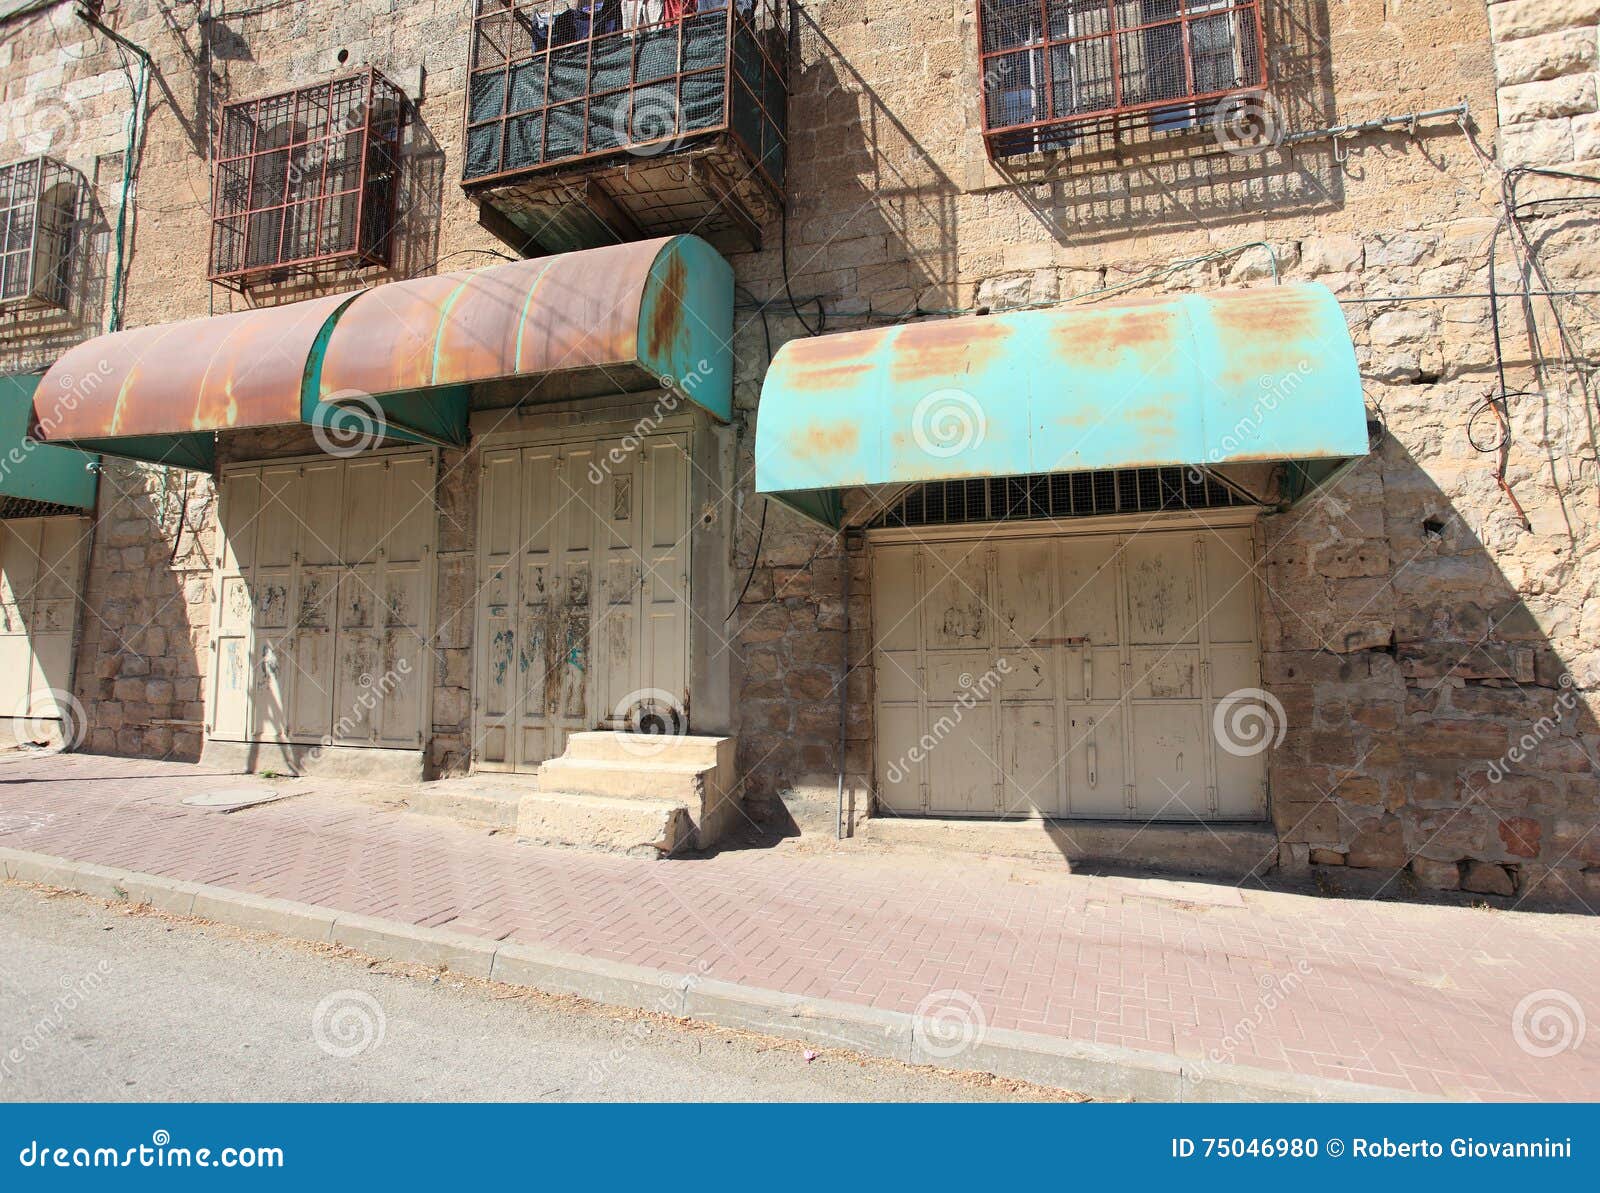 closed shops, houses with grating, hebron